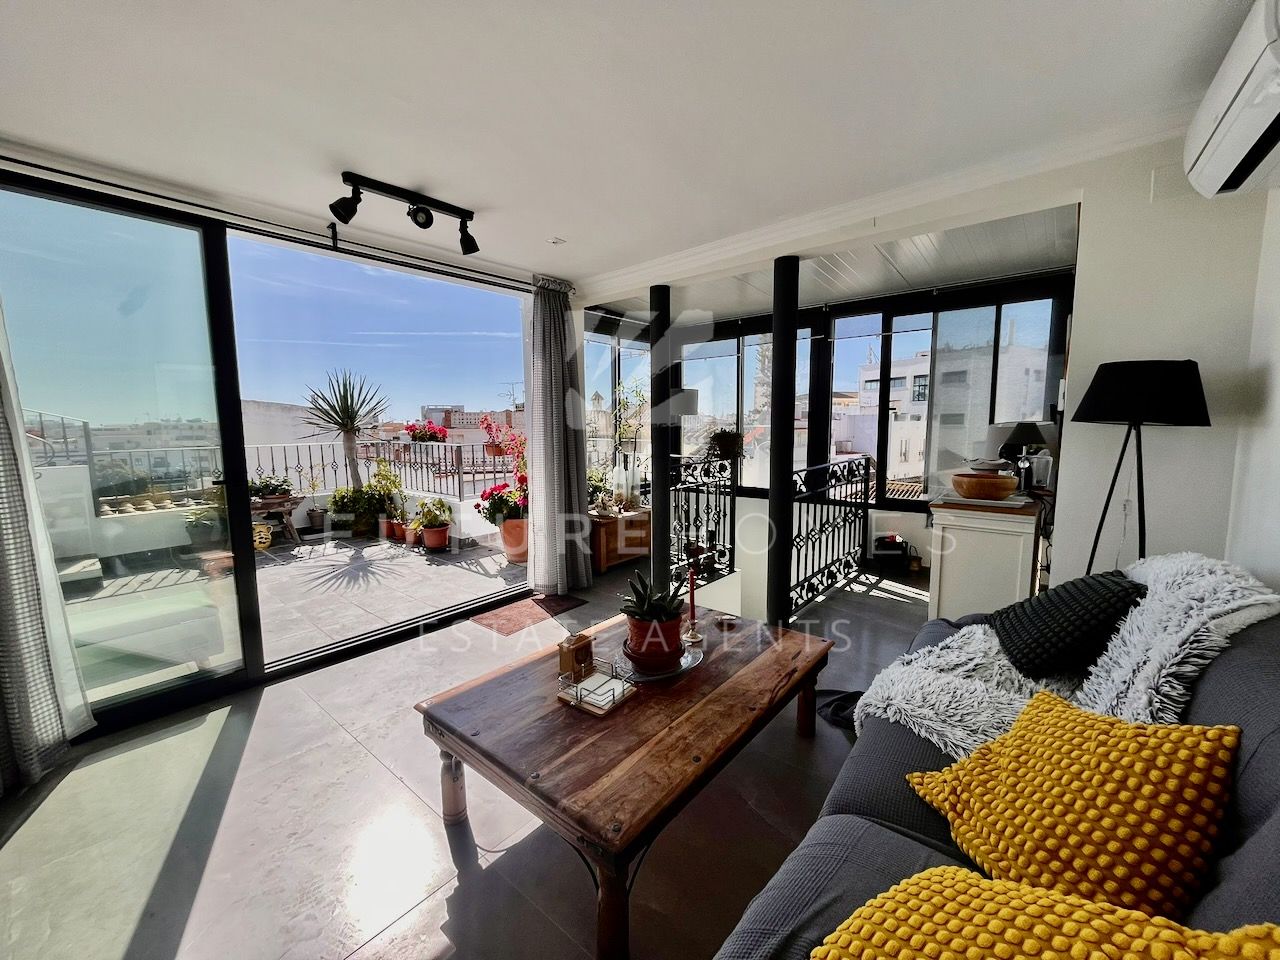 One of a kind reformed townhouse in the heart to Estepona's Old Town with fantastic views